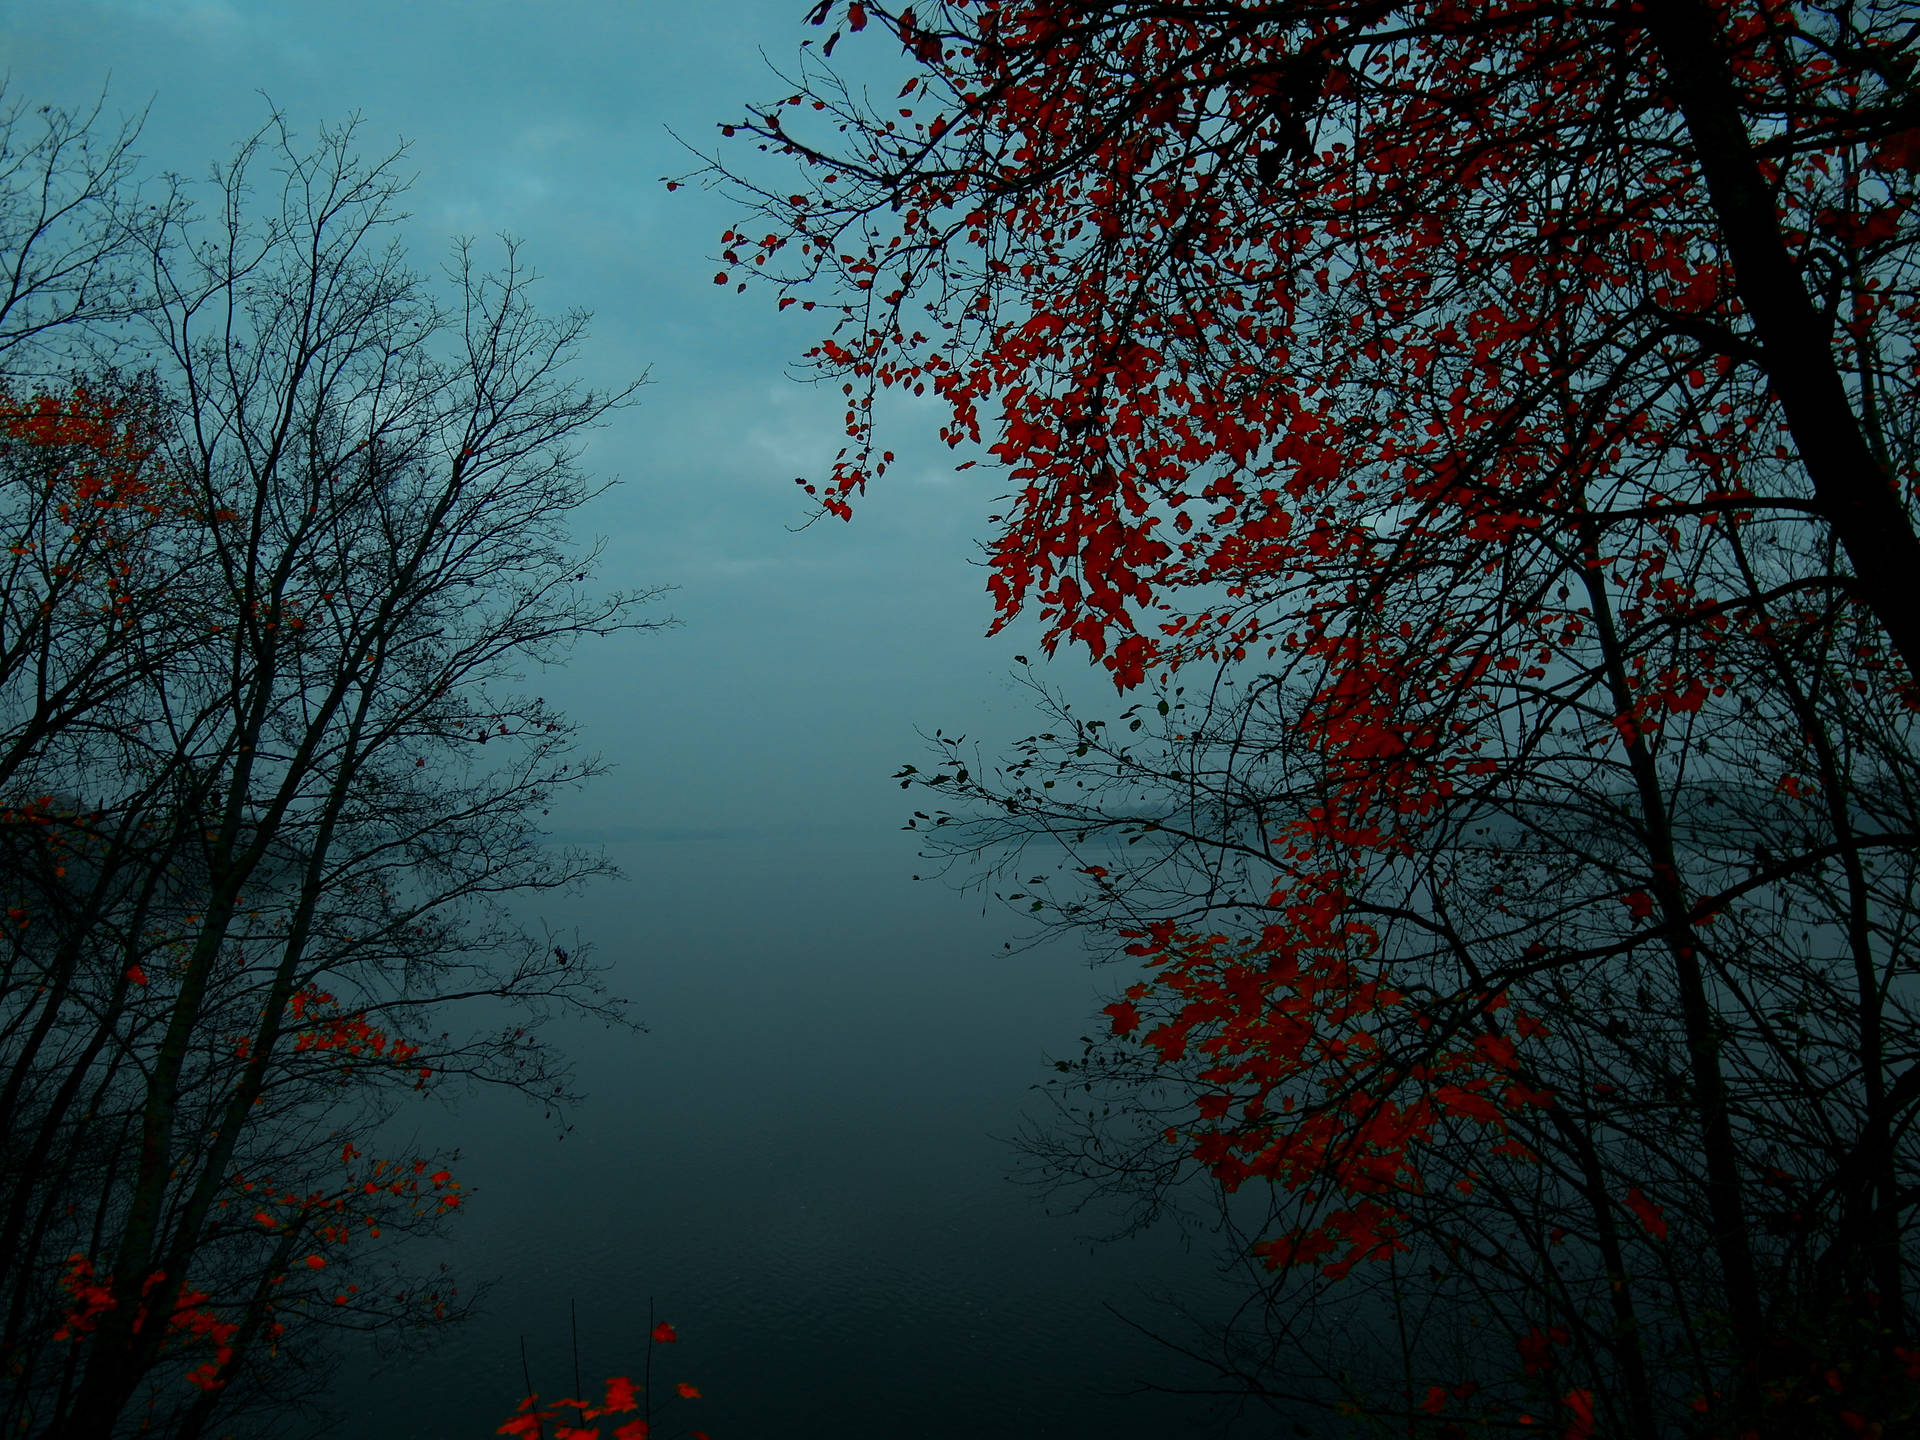 Foggy Forest With Red Leaves Wallpaper